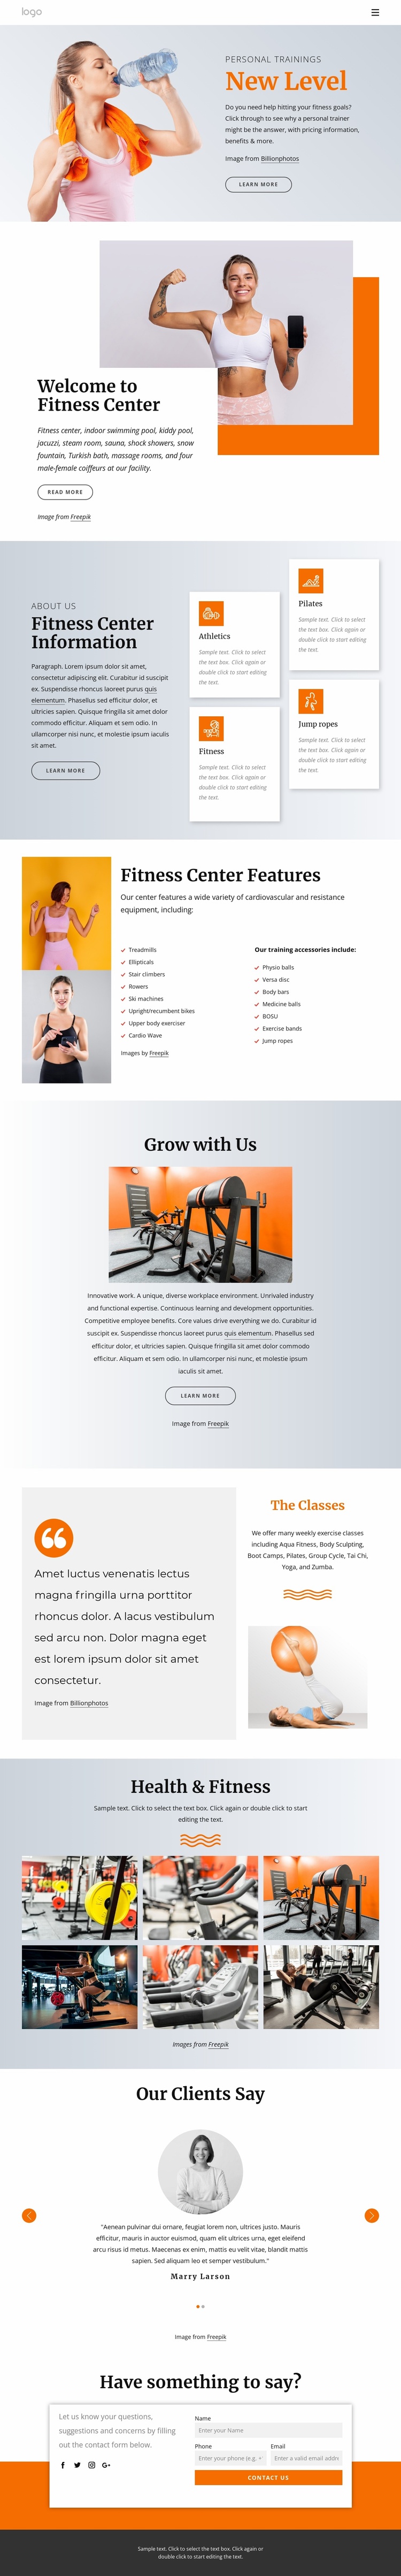 24 hour fitness center Landing Page